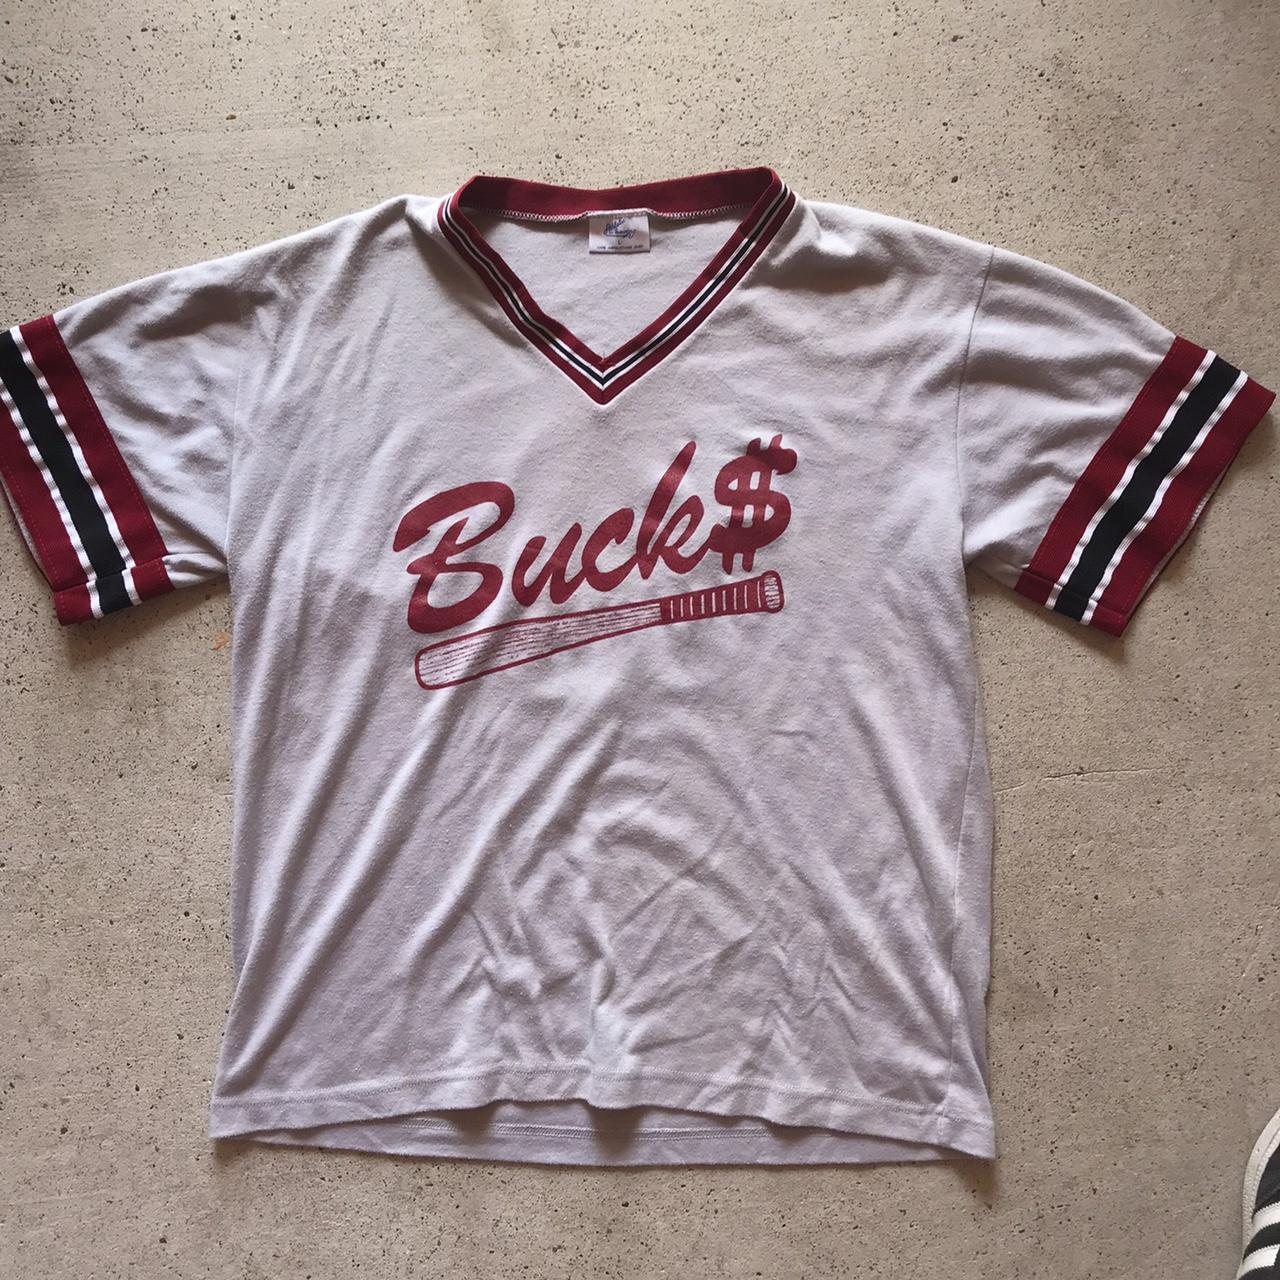 Chicago baseball jersey by Vanhope - size large - Depop